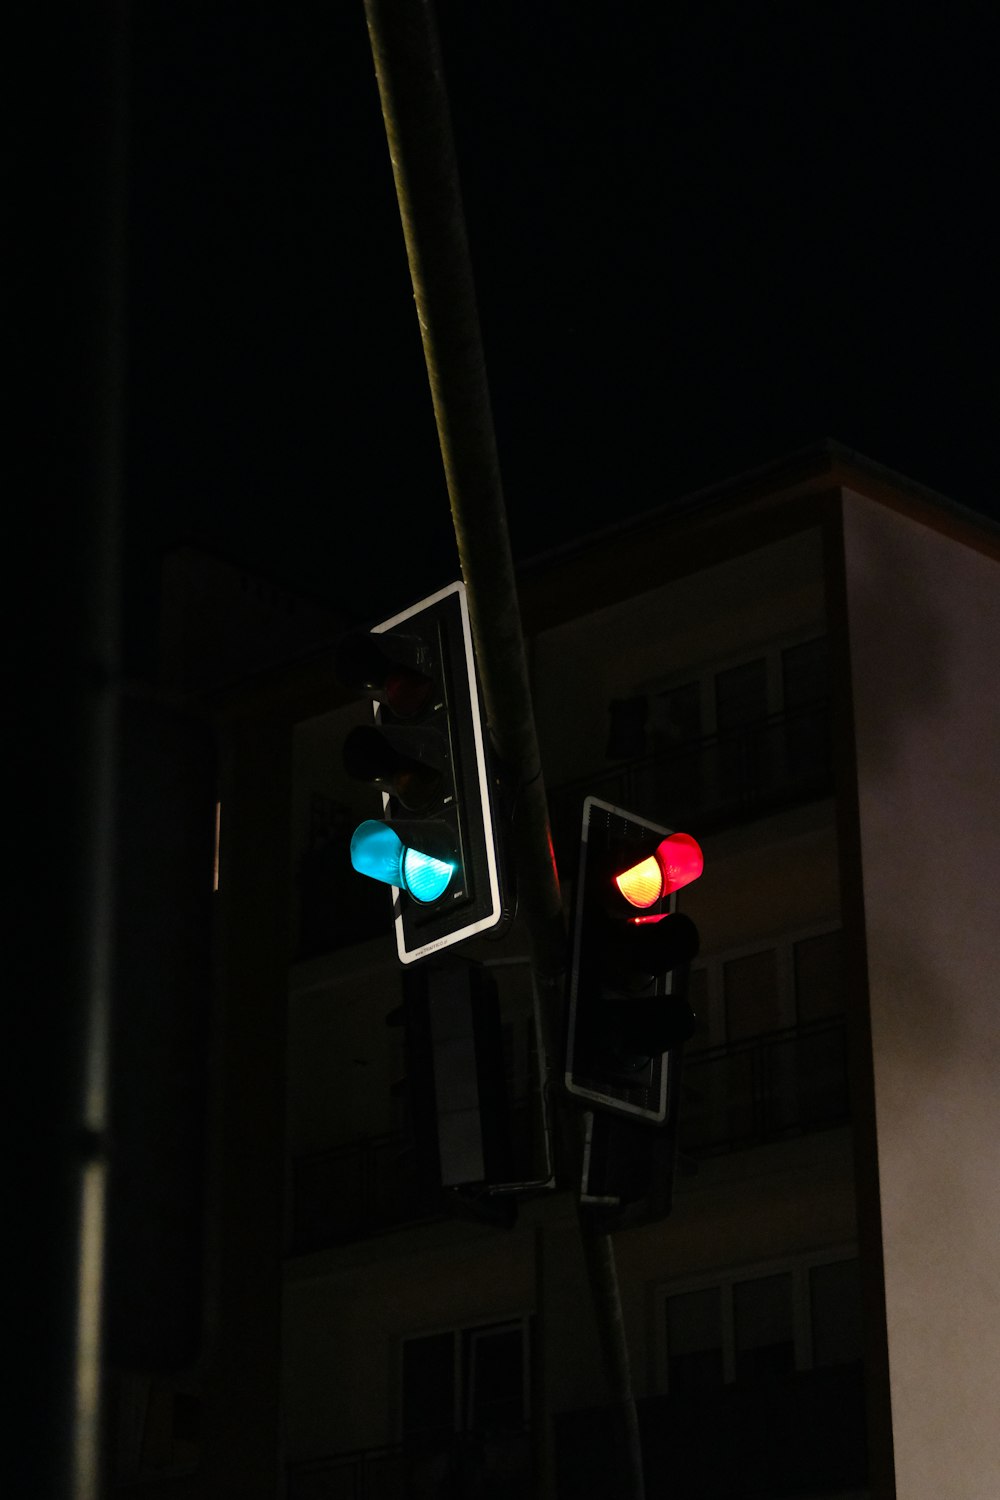 a traffic light with a building in the background